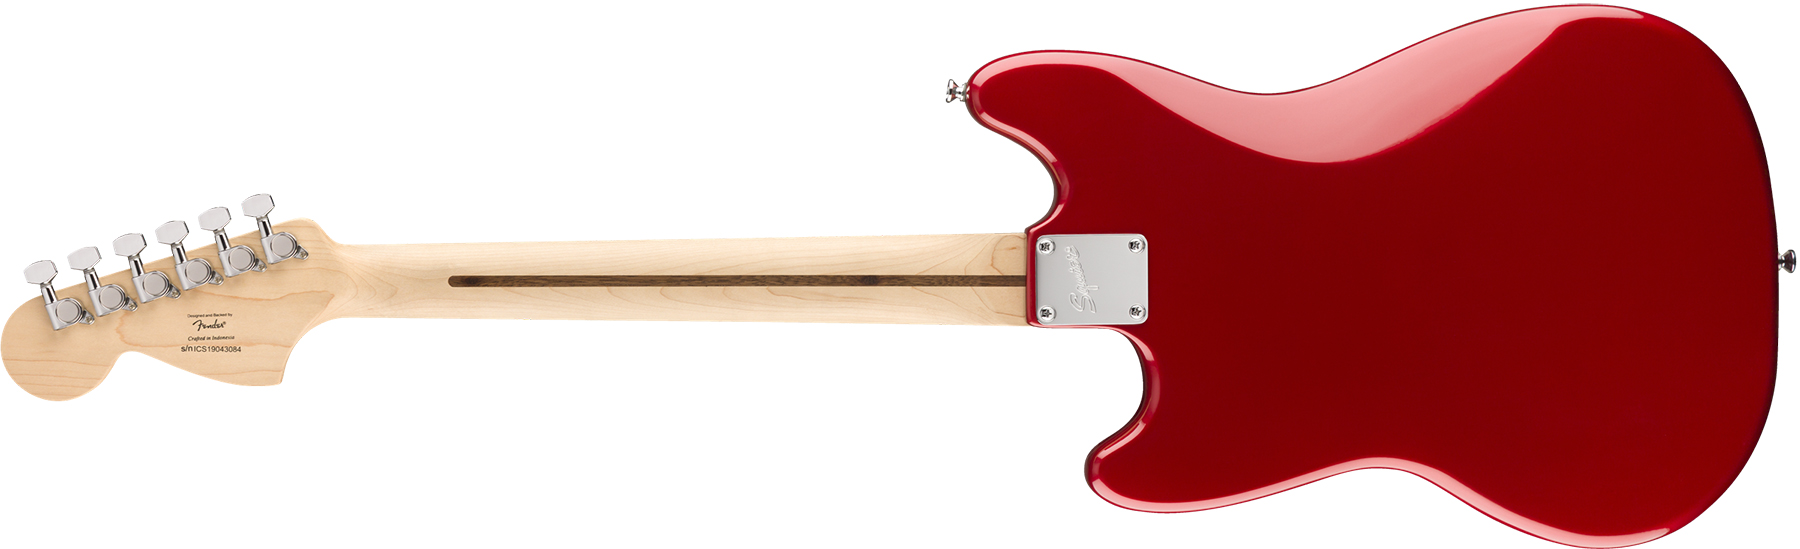 Squier Mustang Bullet Competition Hh Fsr Ht Lau - Candy Apple Red - Retro rock electric guitar - Variation 1